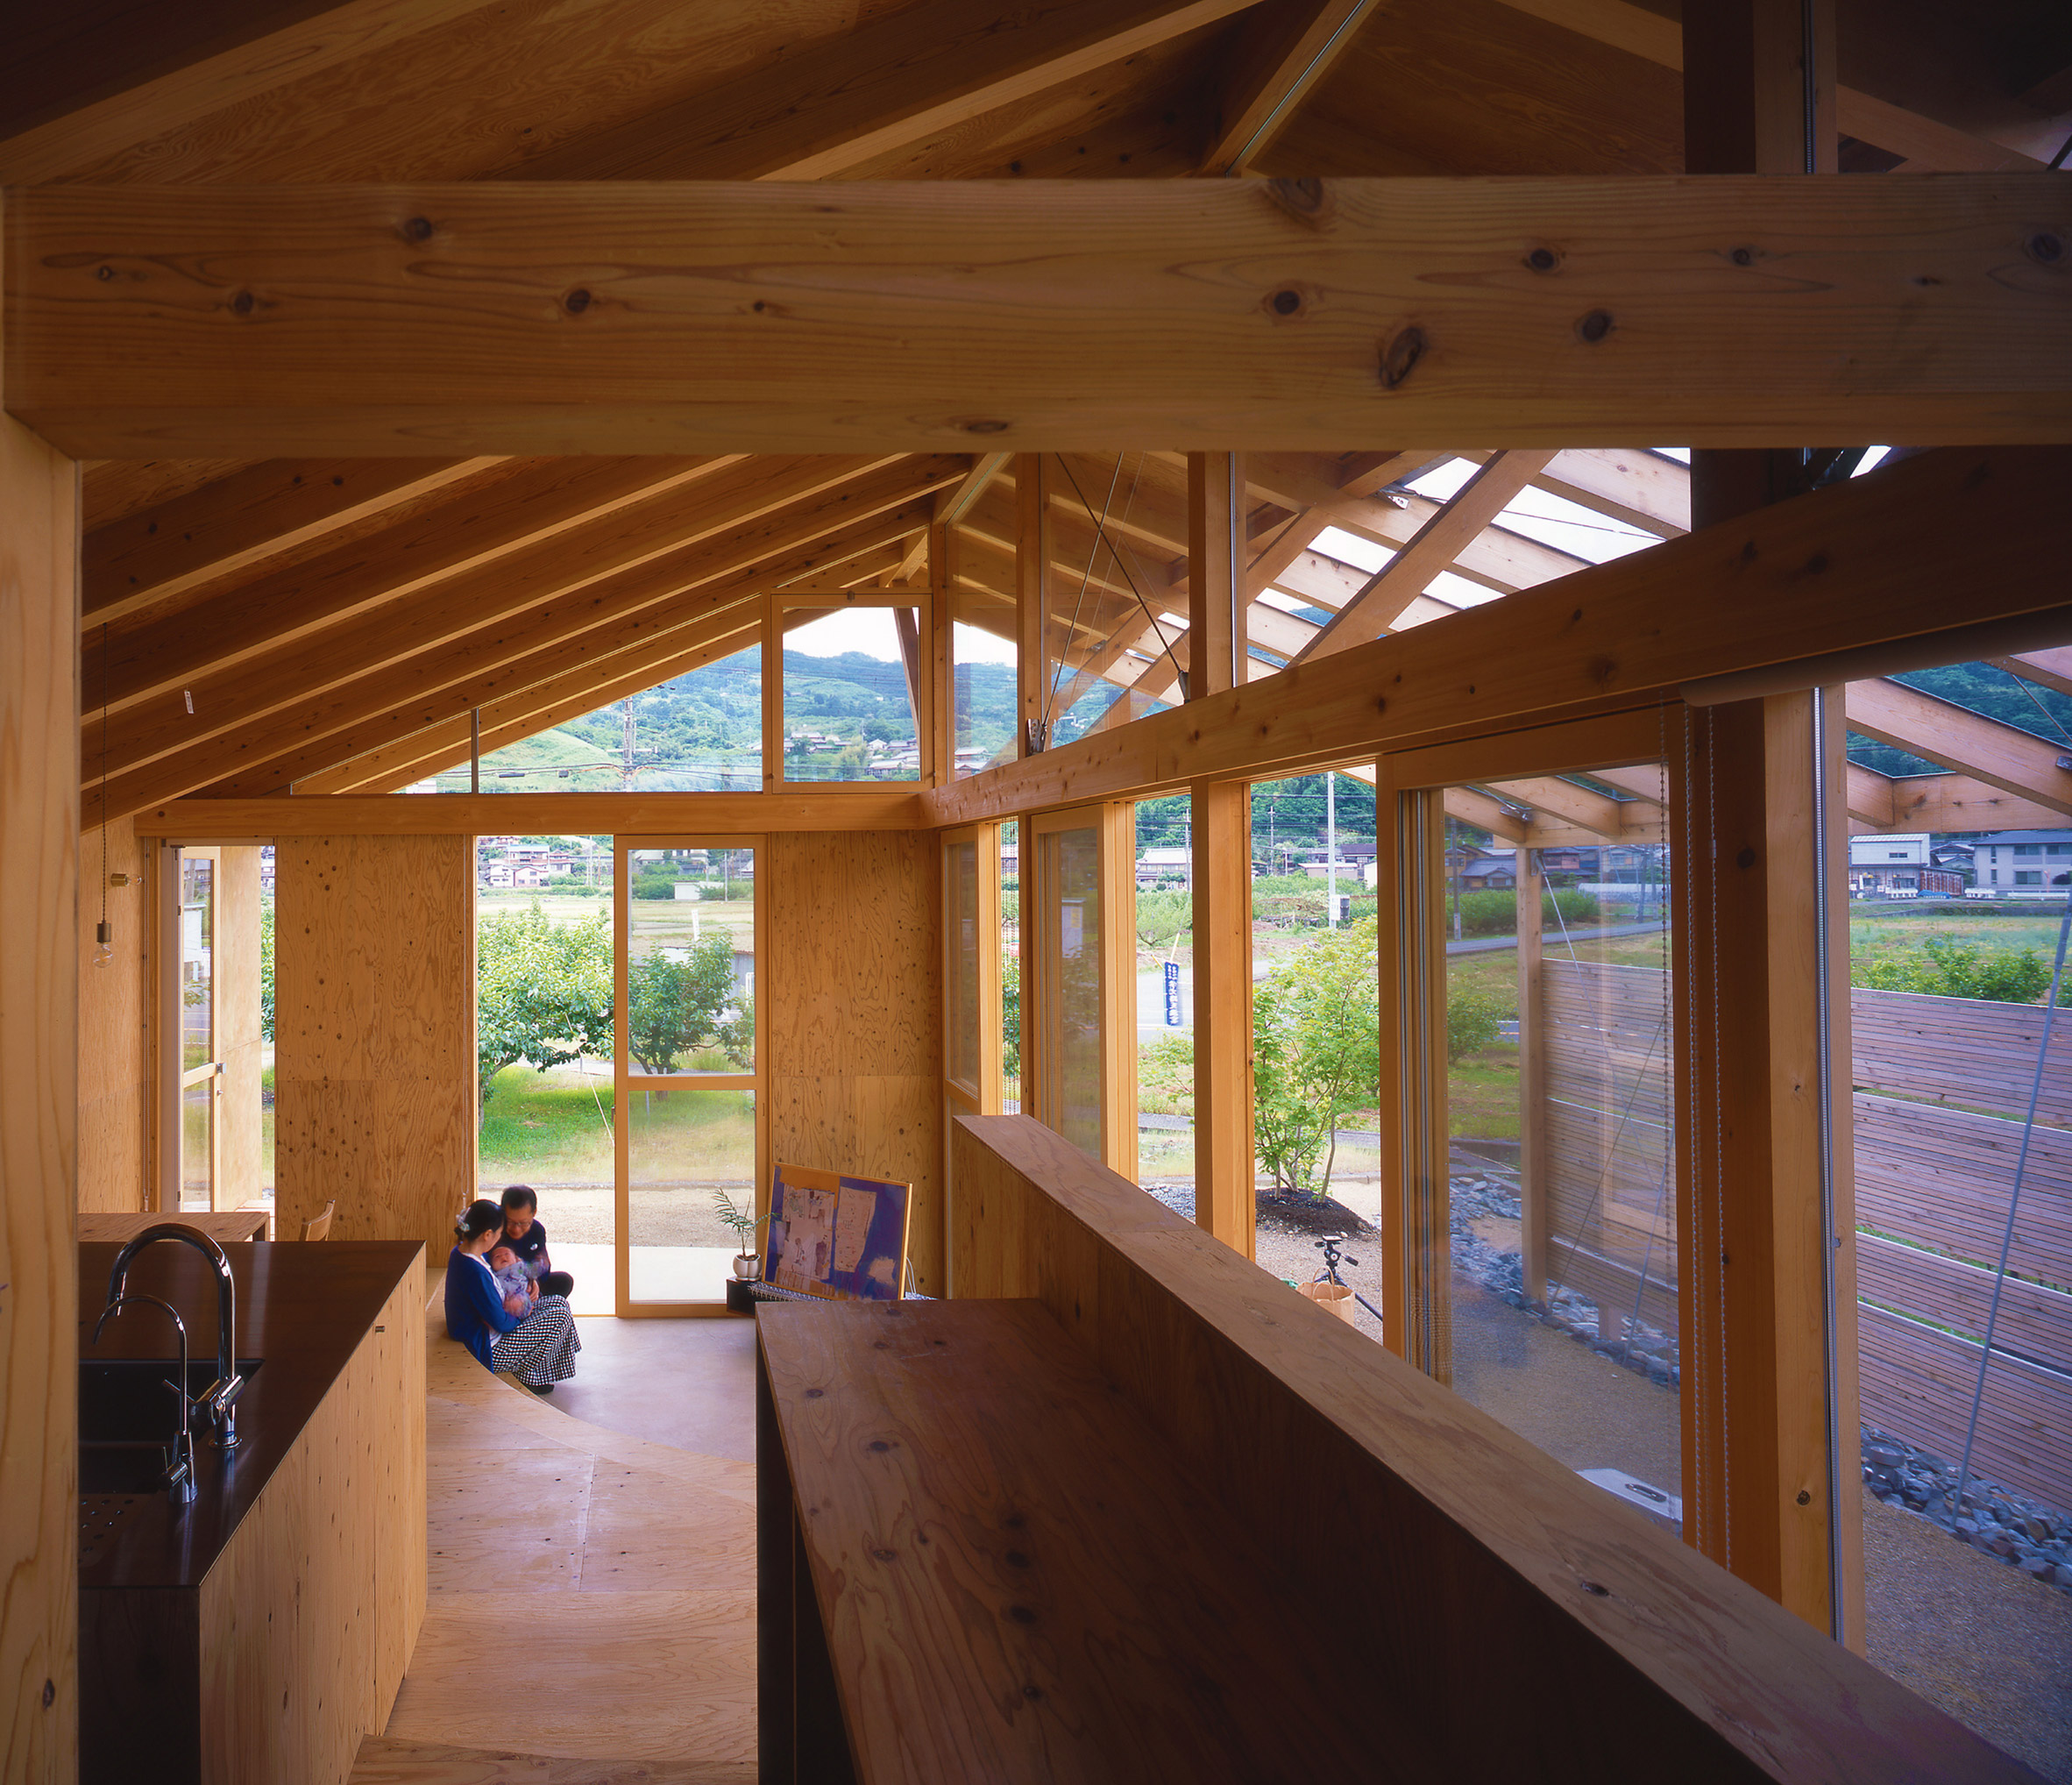 Barn-like timber home interior connected to the outdoors